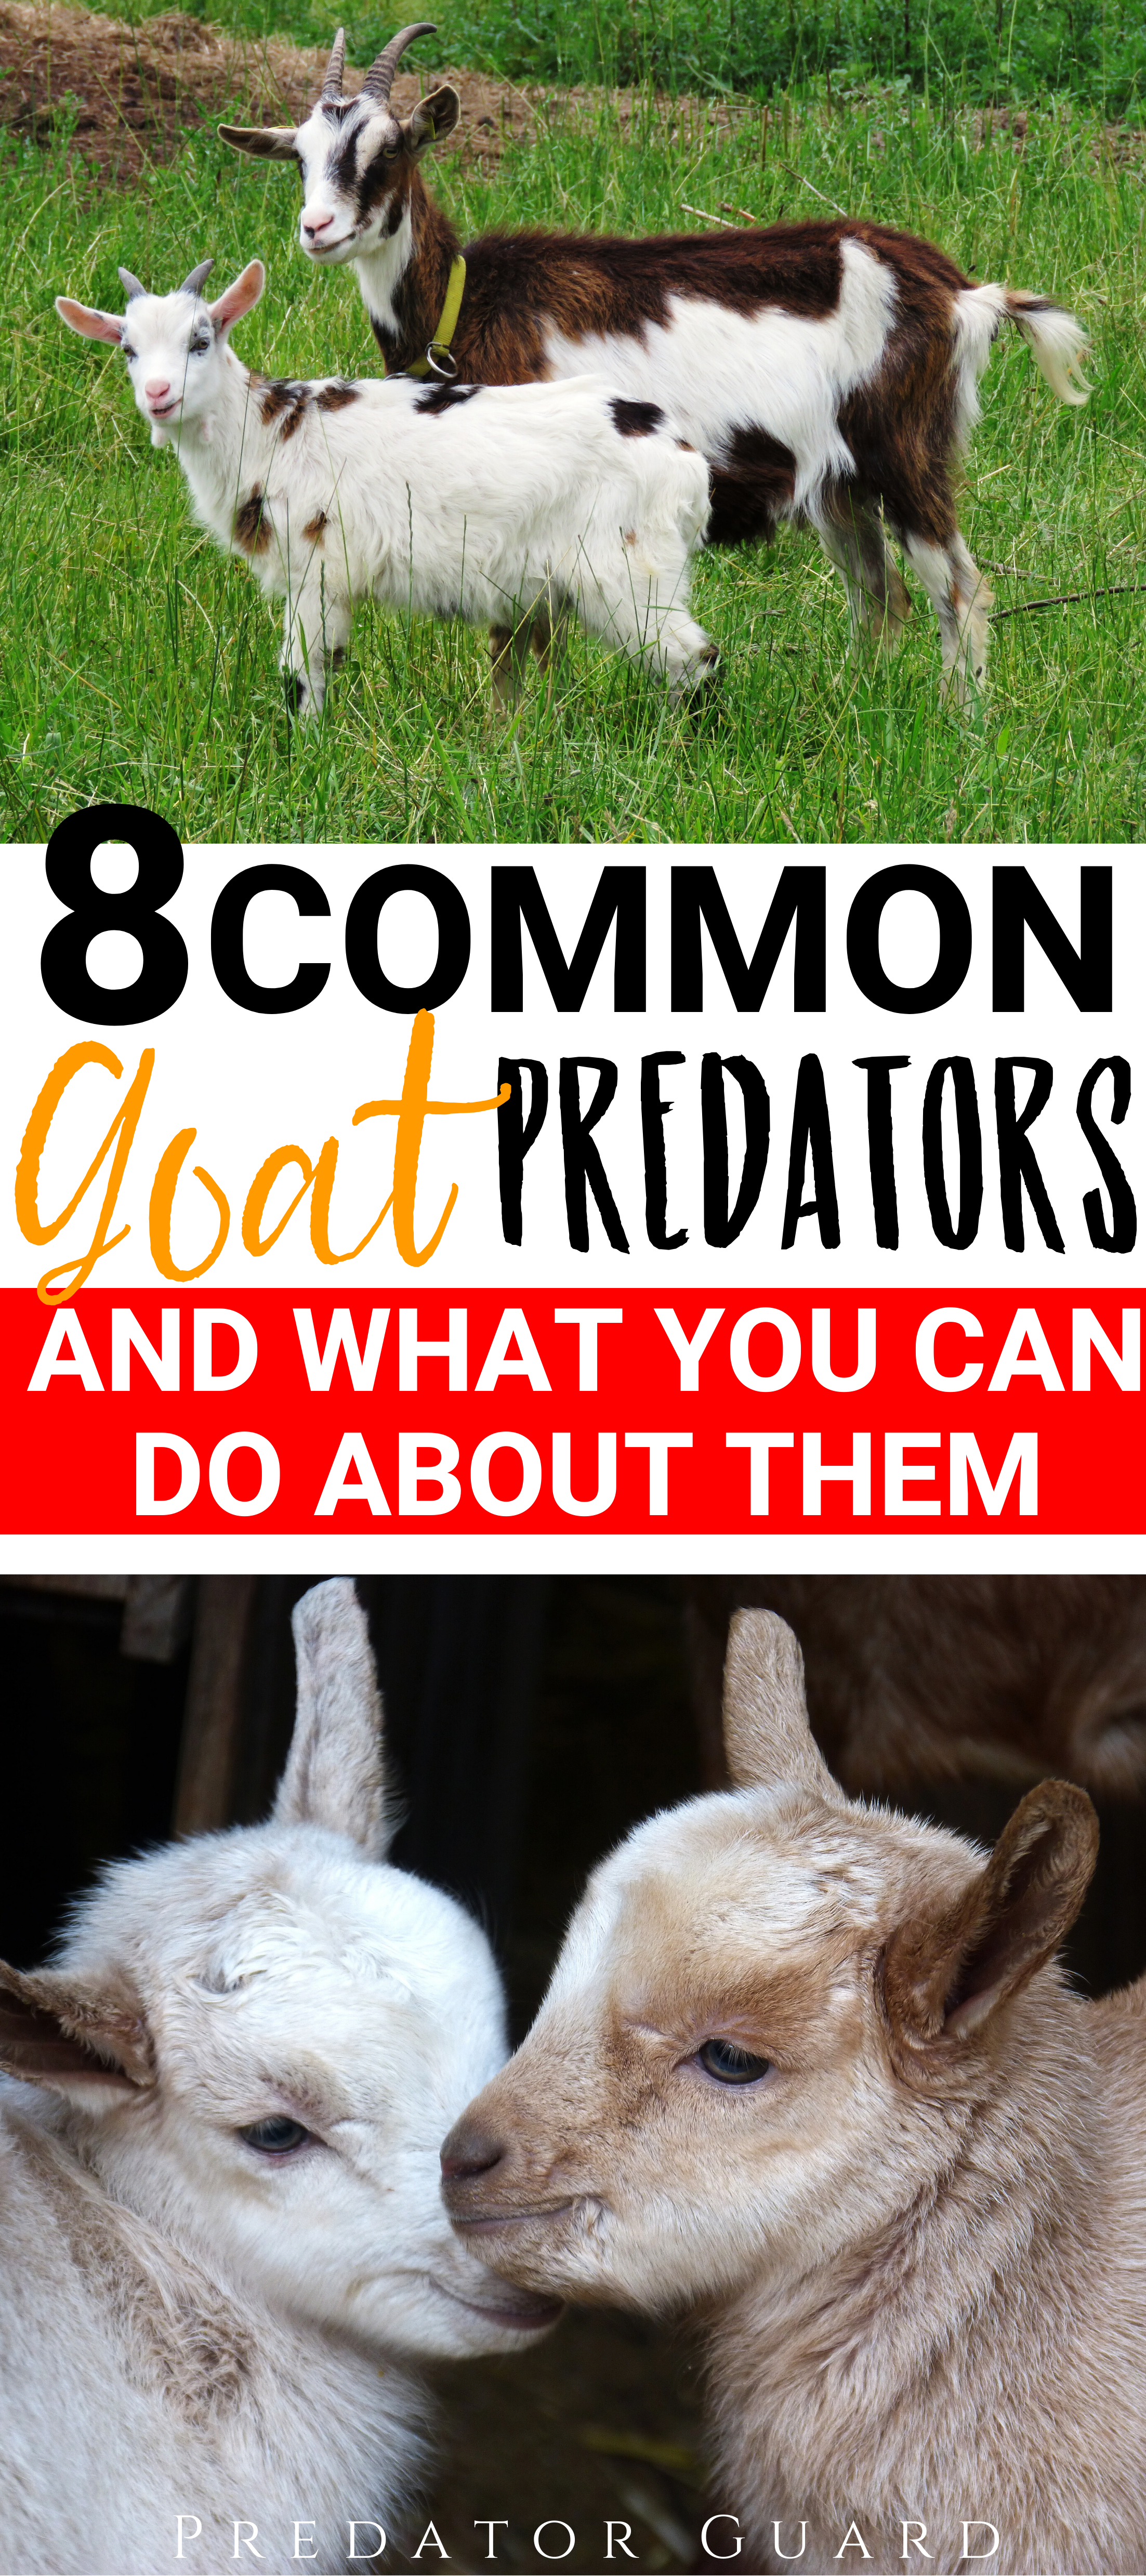 Common Goat Predators and What You Can do About Them | Predator Guard